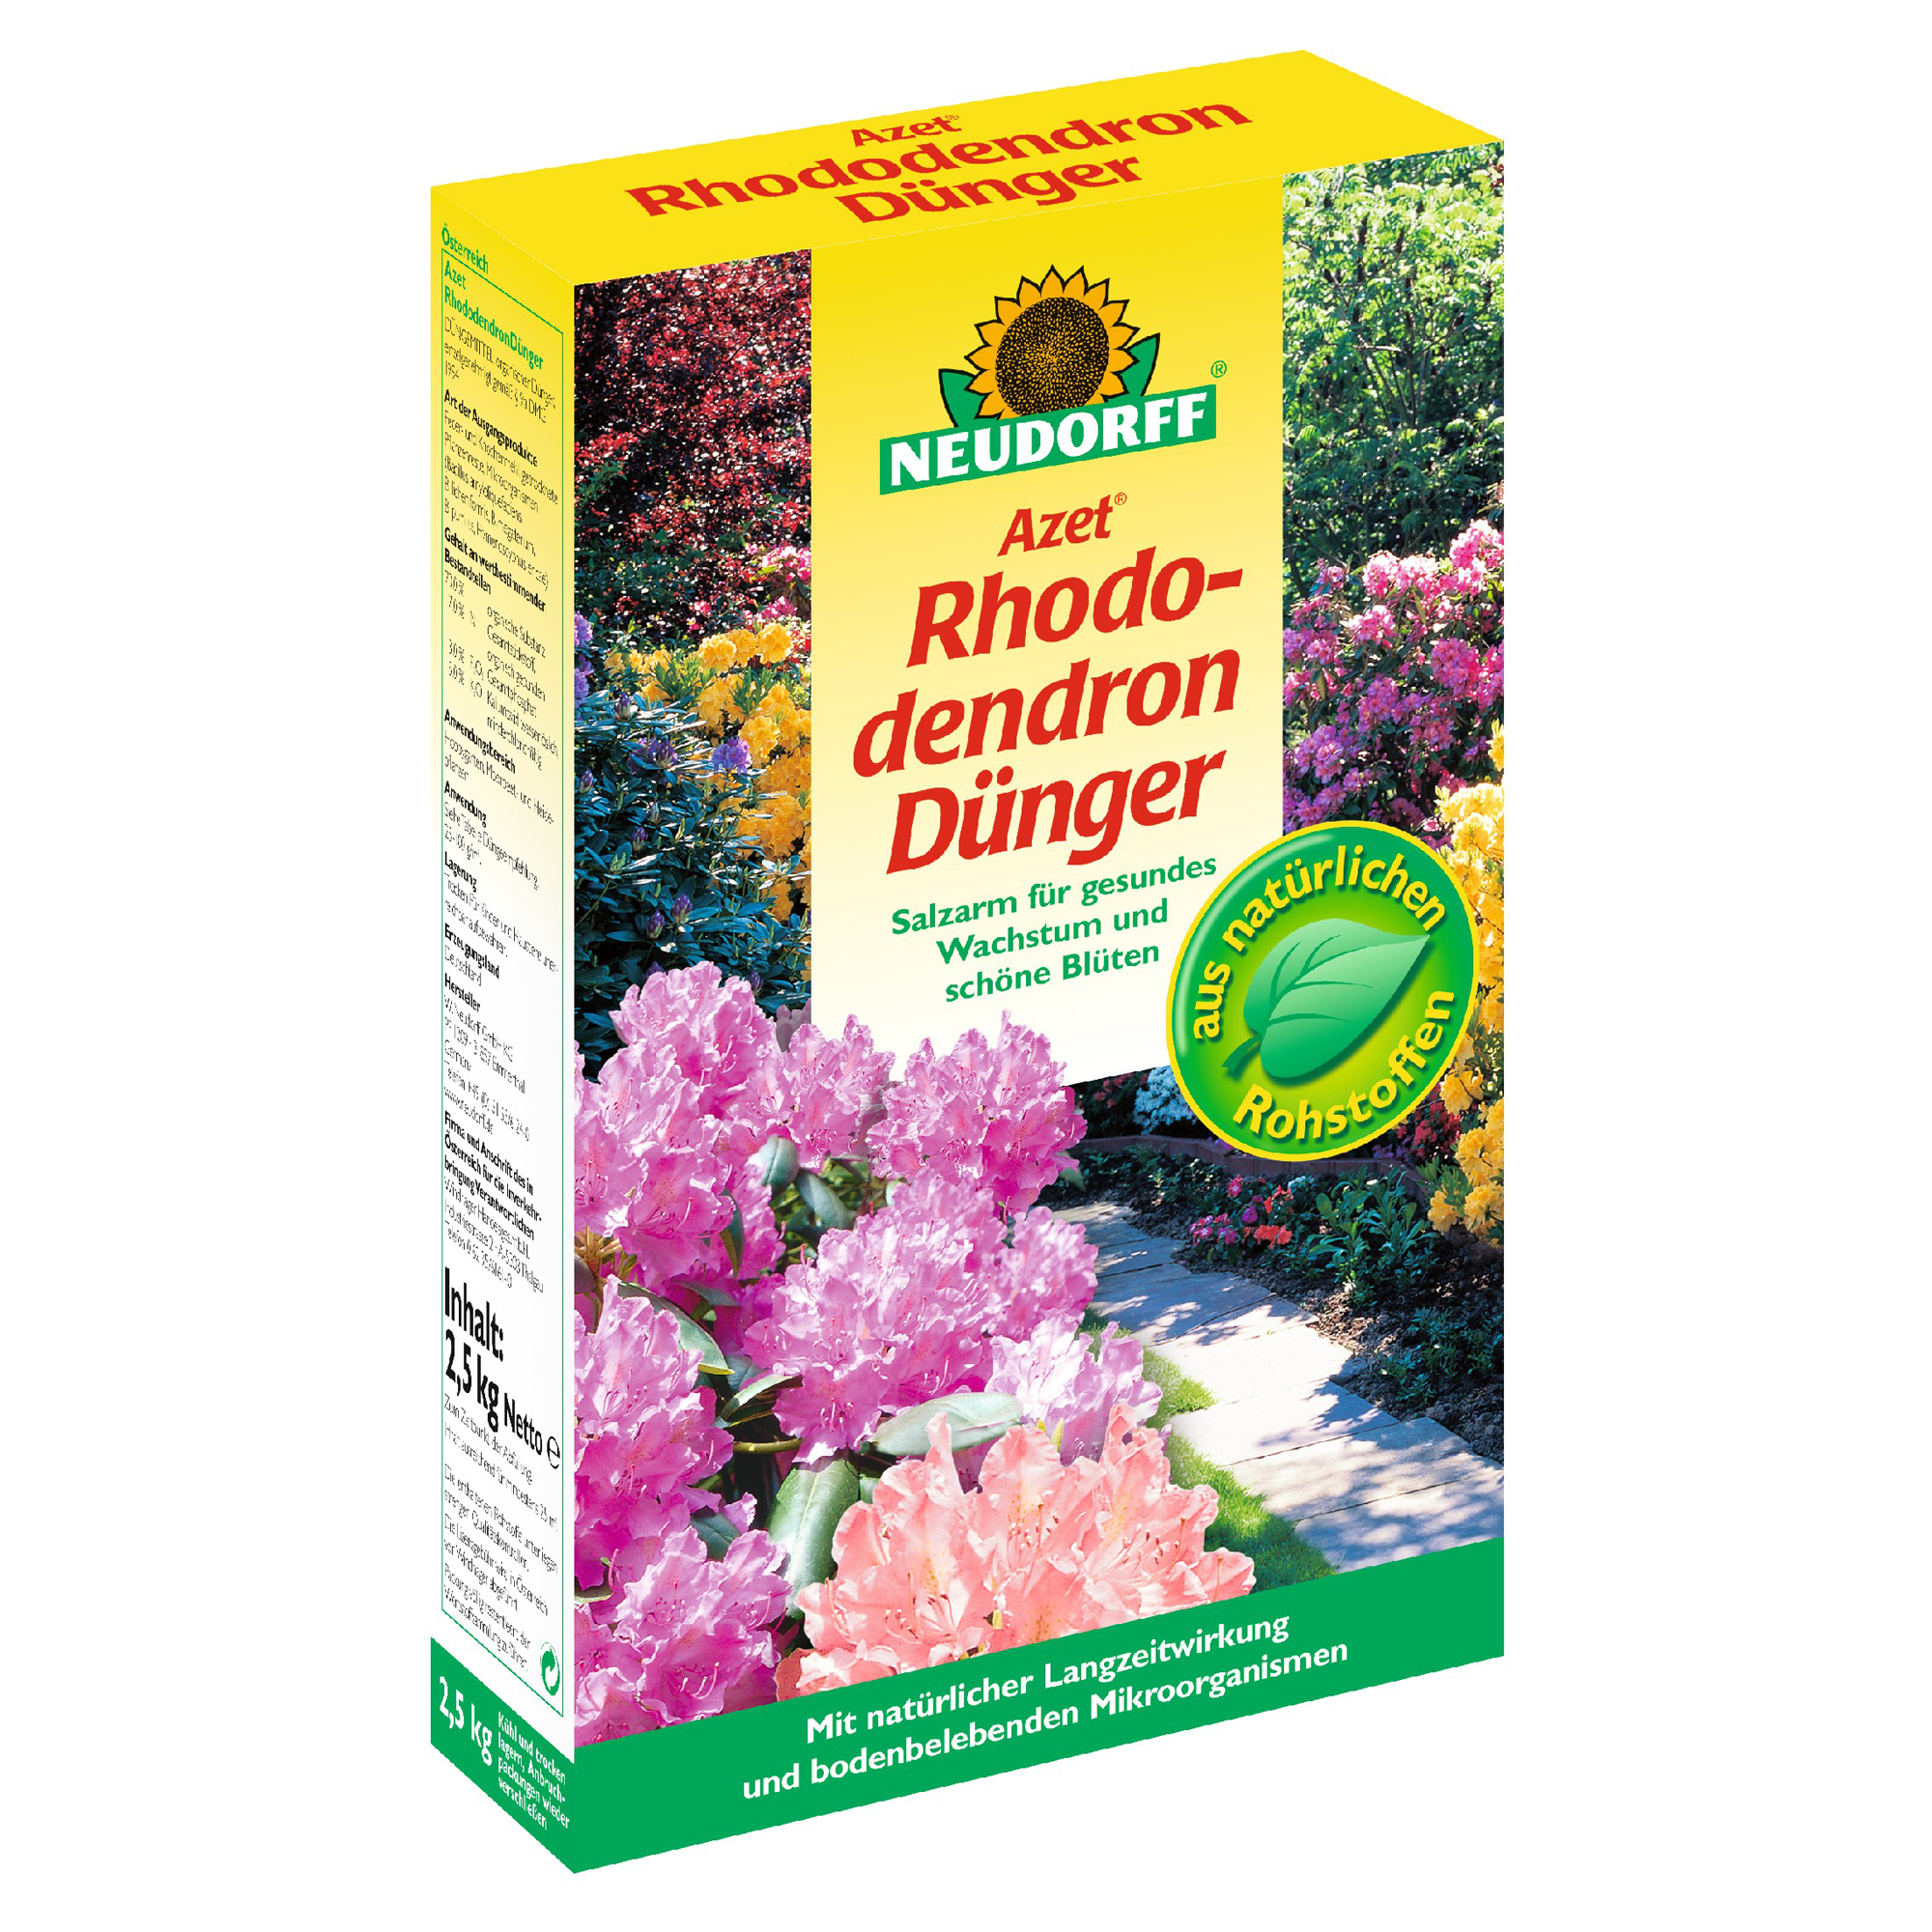 Rhododendrondünger 2,5 kg + product picture